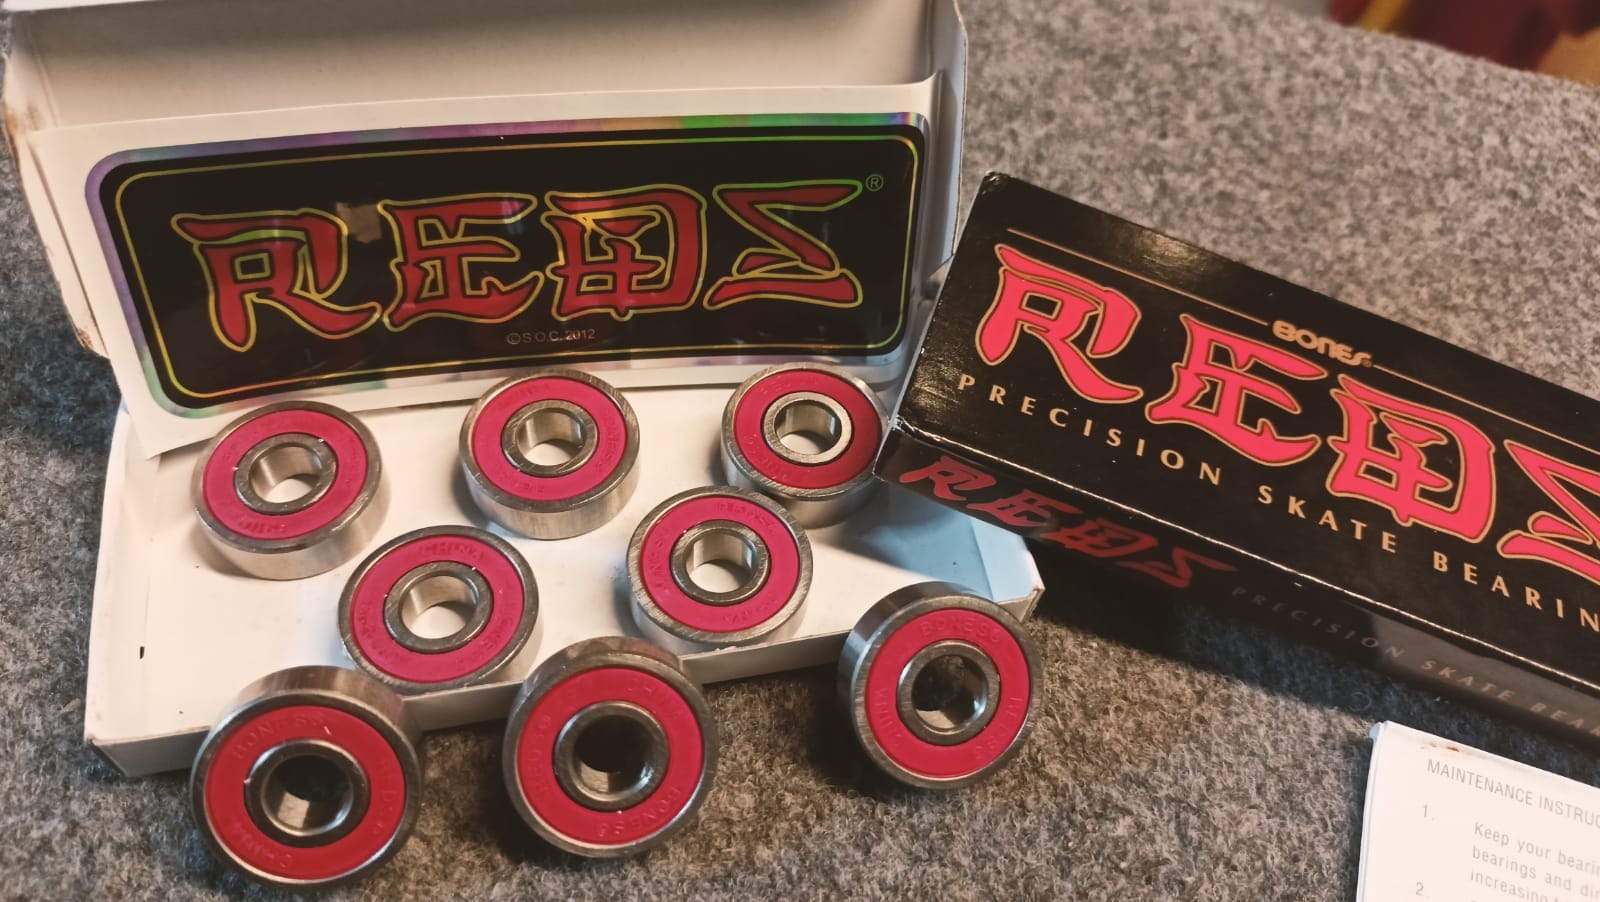 Steel bearings are ideal for longboarding as they are strong and durable, resulting in a longer lifespan for the longboard.